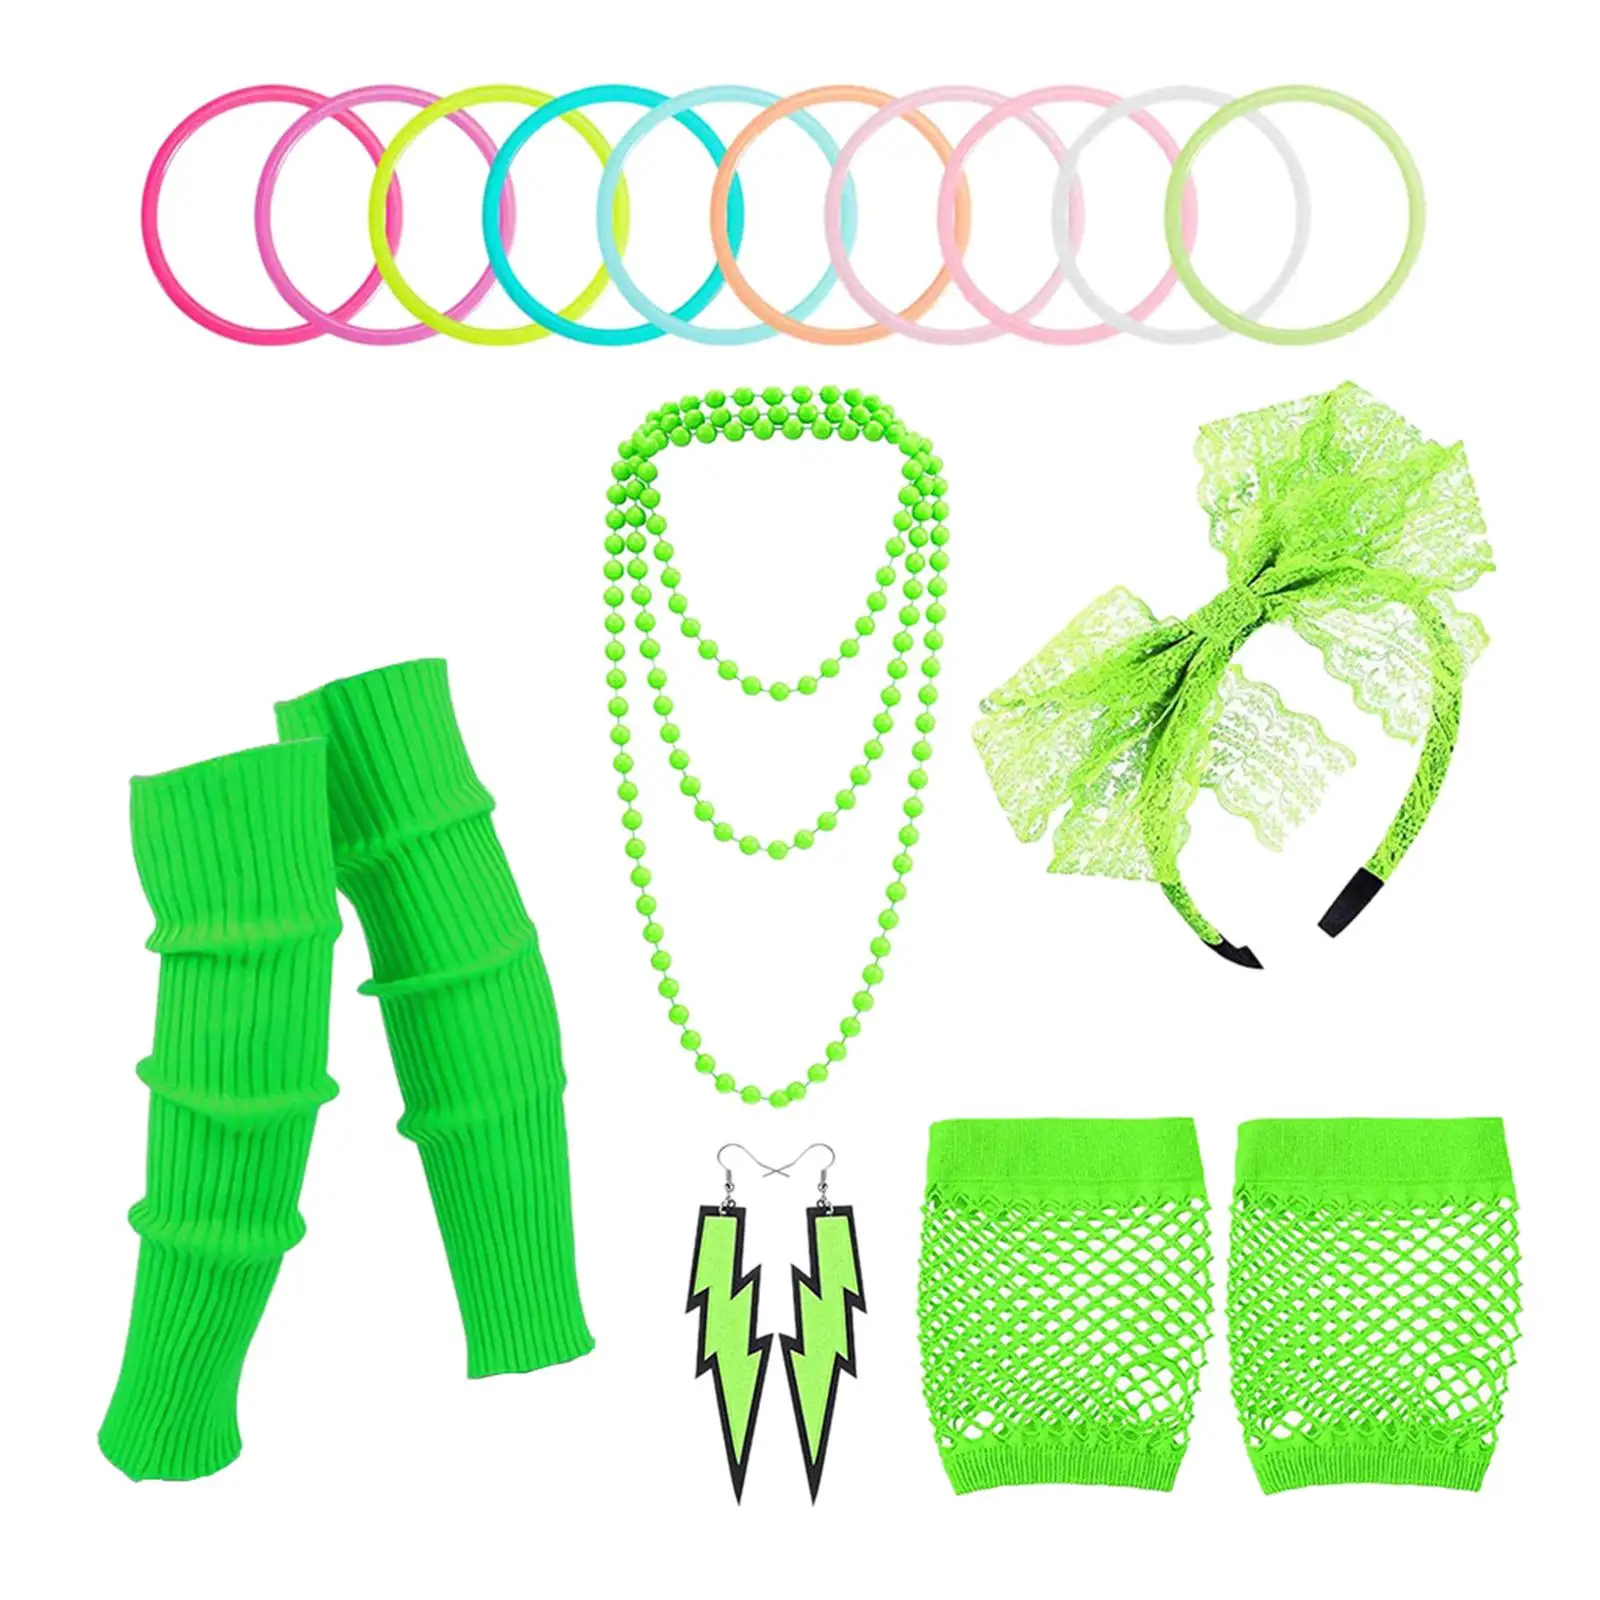 Women Costume Outfit Accessories Set Beads Necklace Outfit Bracelet Gloves for Party Halloween Stage Performance Bar Decoration